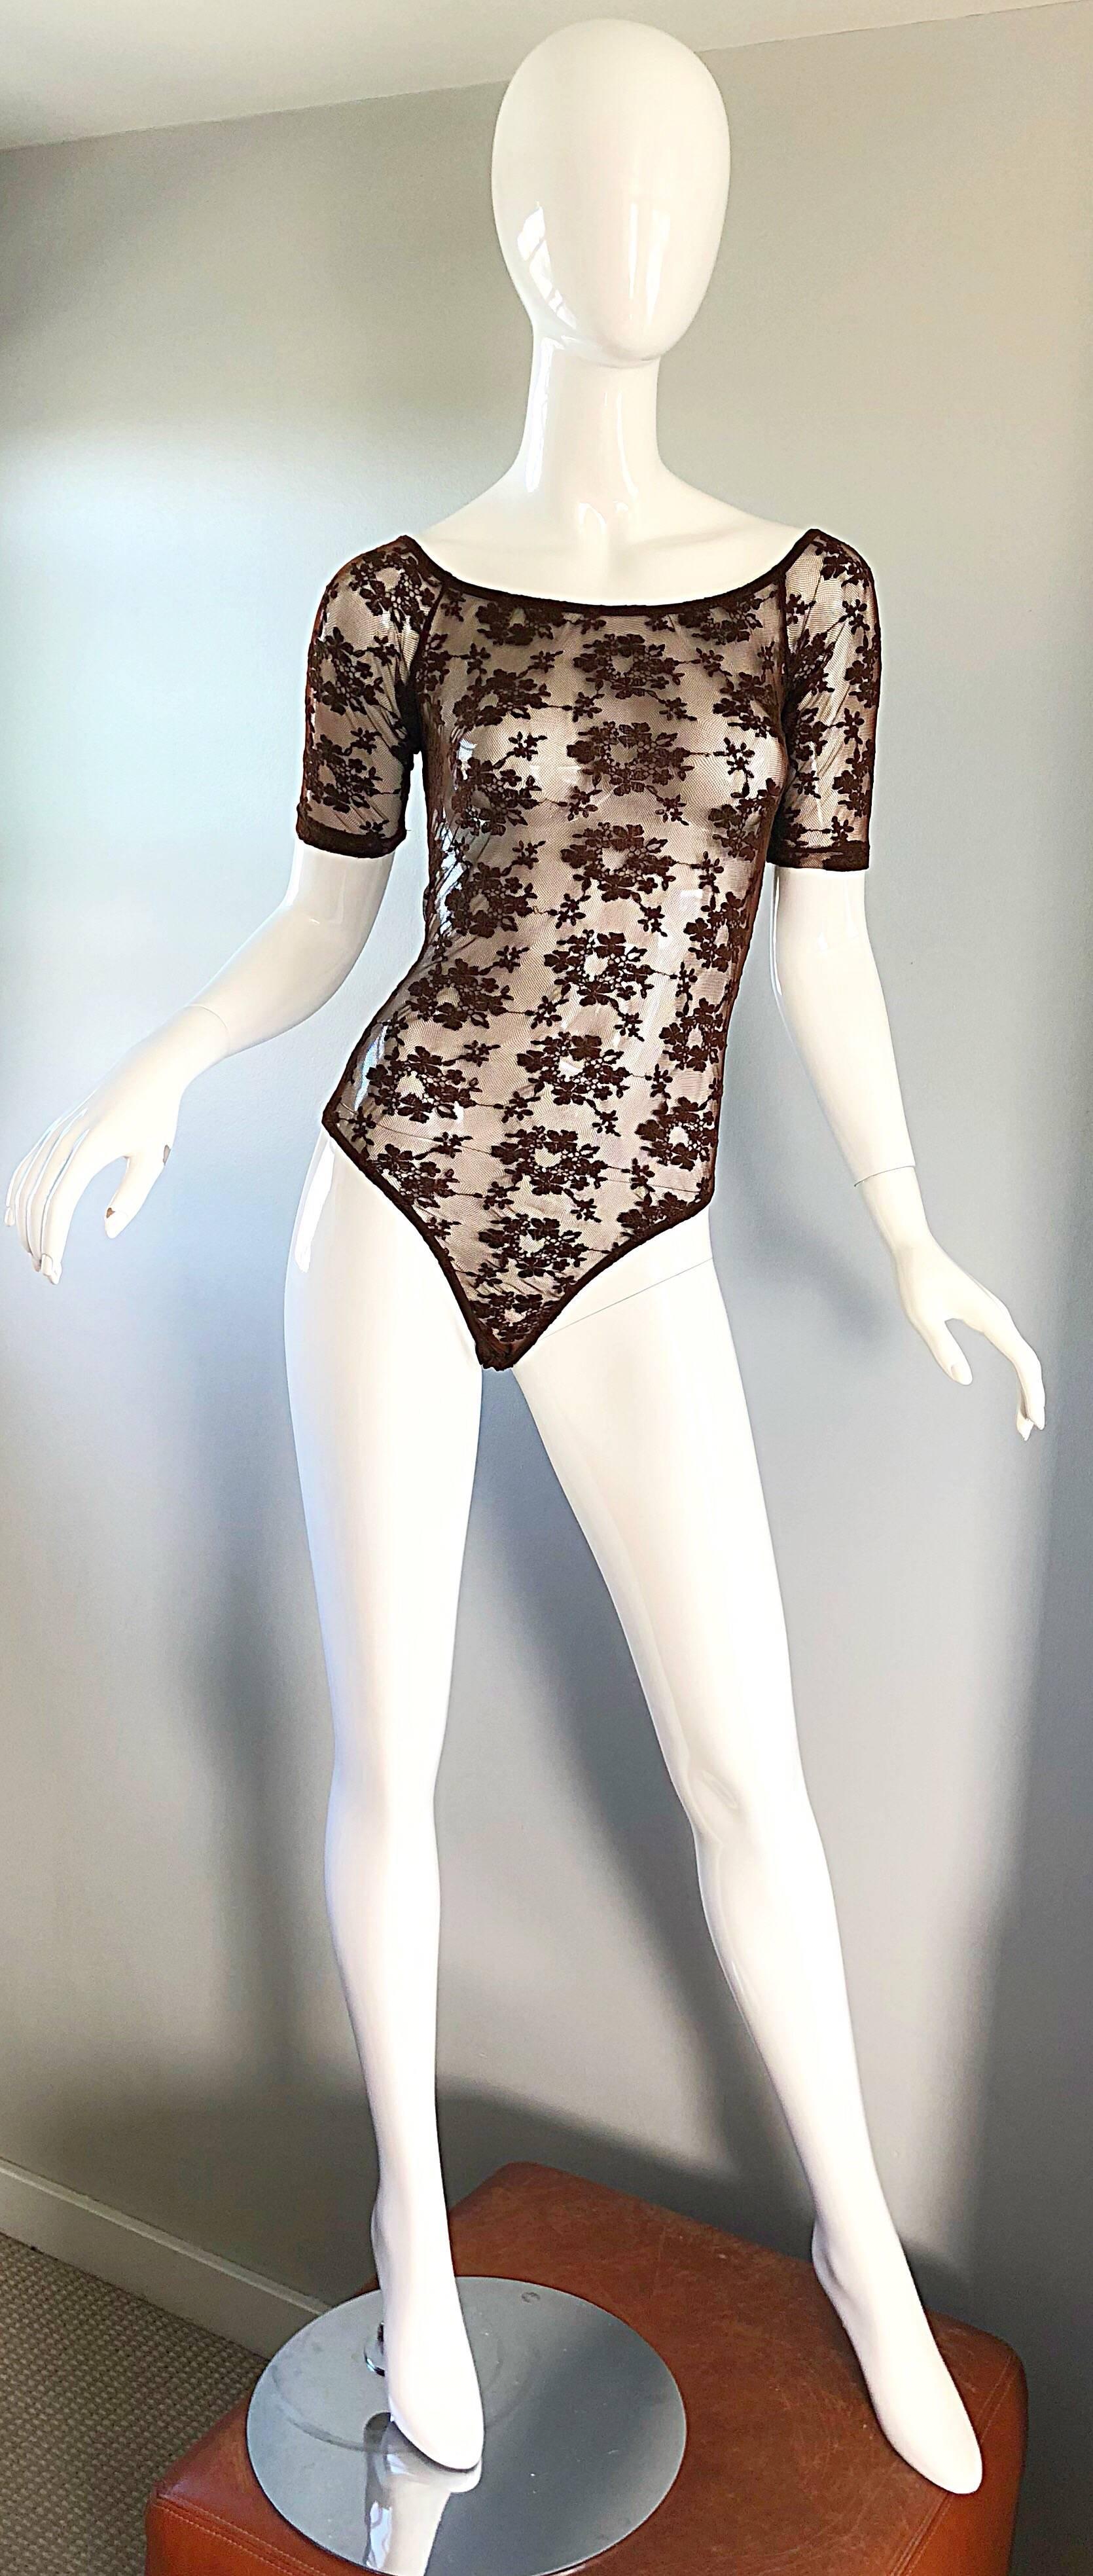 Rare and collectible RIFAT OZBEK brown chantily French lace semi sheer bodysuit from the designer's infamous 1994 Collection! Features brown lace flower print that looks amazing on. Three snaps at interior crotch keeps everything in place. Short